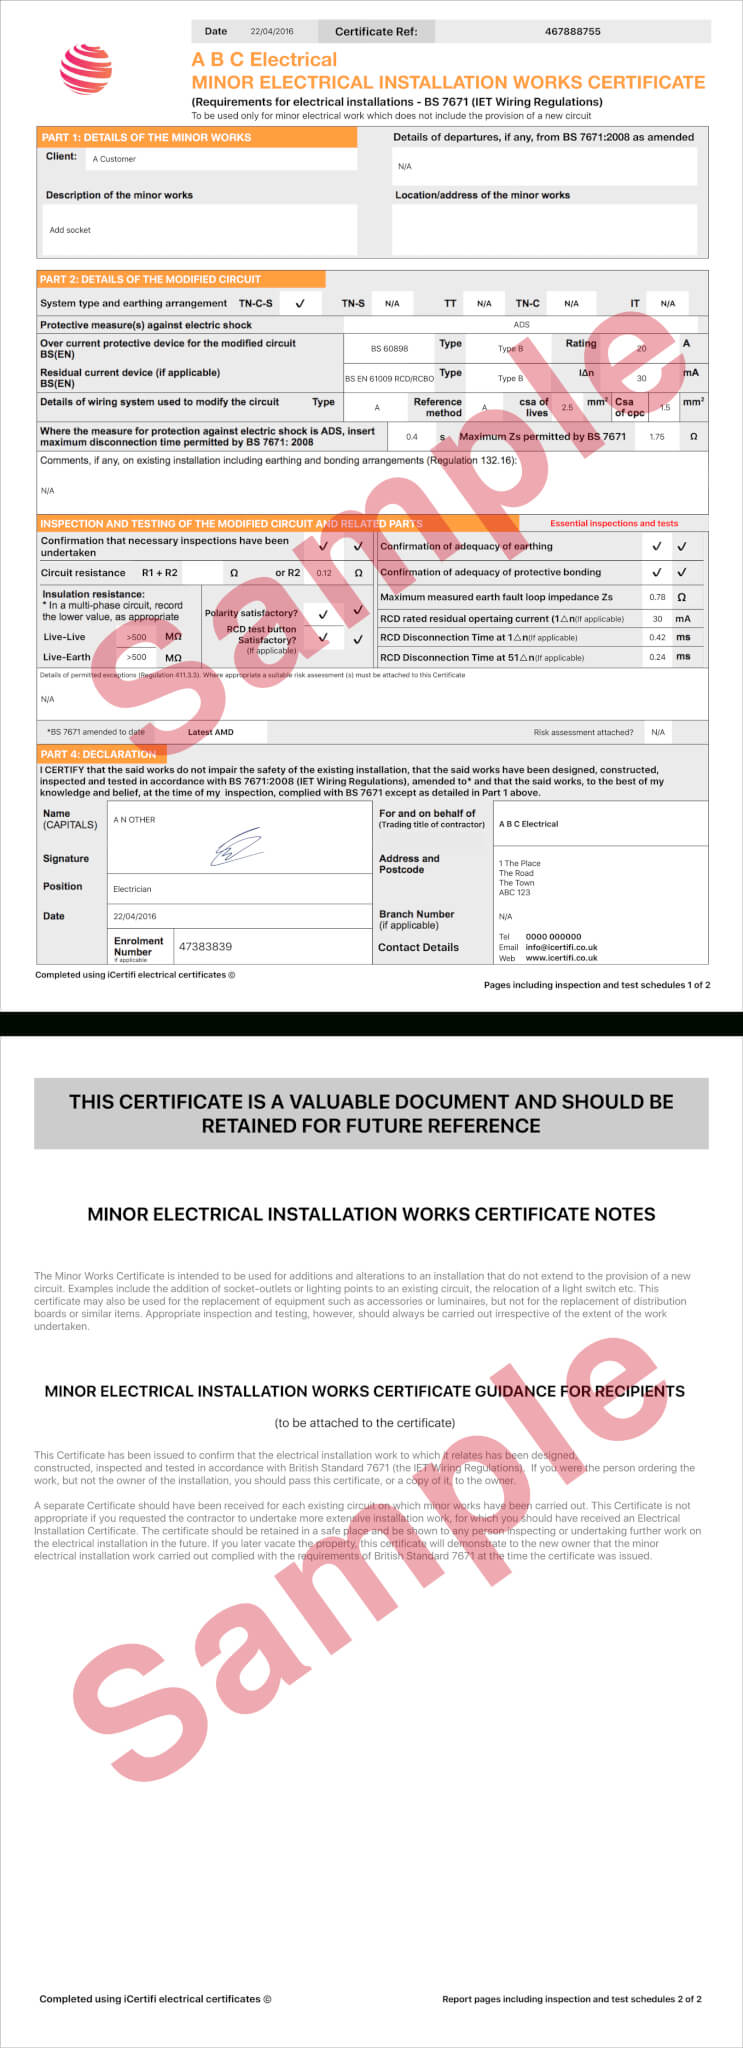 Electrical Certificate - Example Minor Works Certificate Within Electrical Minor Works Certificate Template